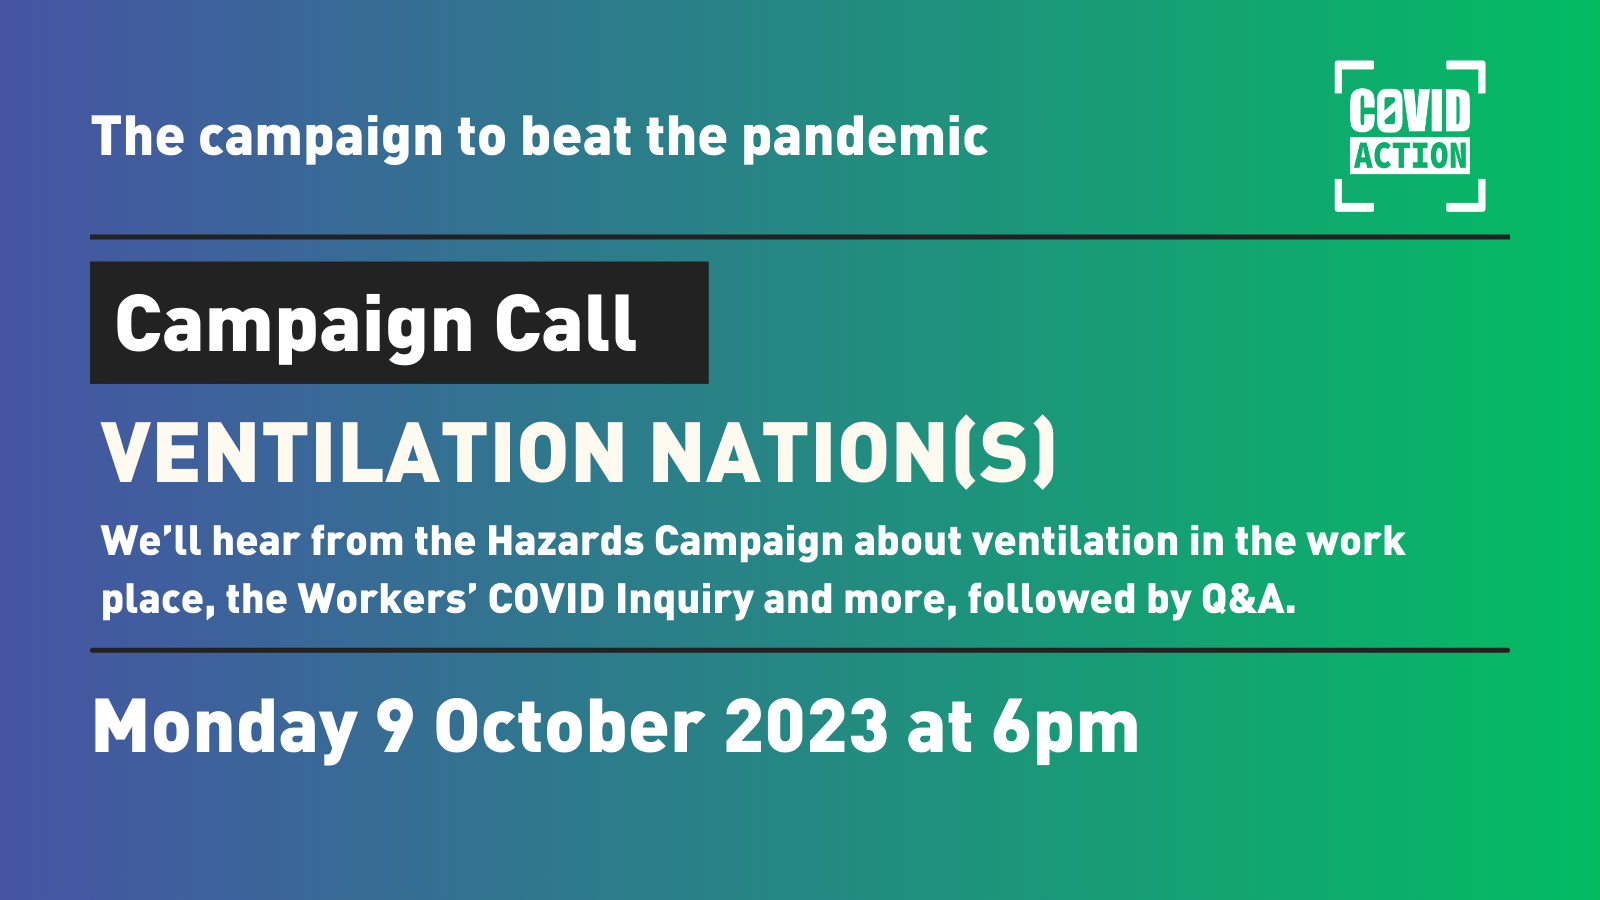 A promotional image for Covid Action UK's next campaign call, titled "Ventilation Nations". It's over a blue/green gradient, and reads: "Campaign Call: Ventilation Nation(s). We'll hear from the Hazard's Campaign about ventilation in the work place, the Workers' COVID Inquiry and more, followed by Q&A." The event will be on Monday 9 October 2023 at 6pm. You can go to https://linktr.ee/covidactionuk to register or use the link in the post below.